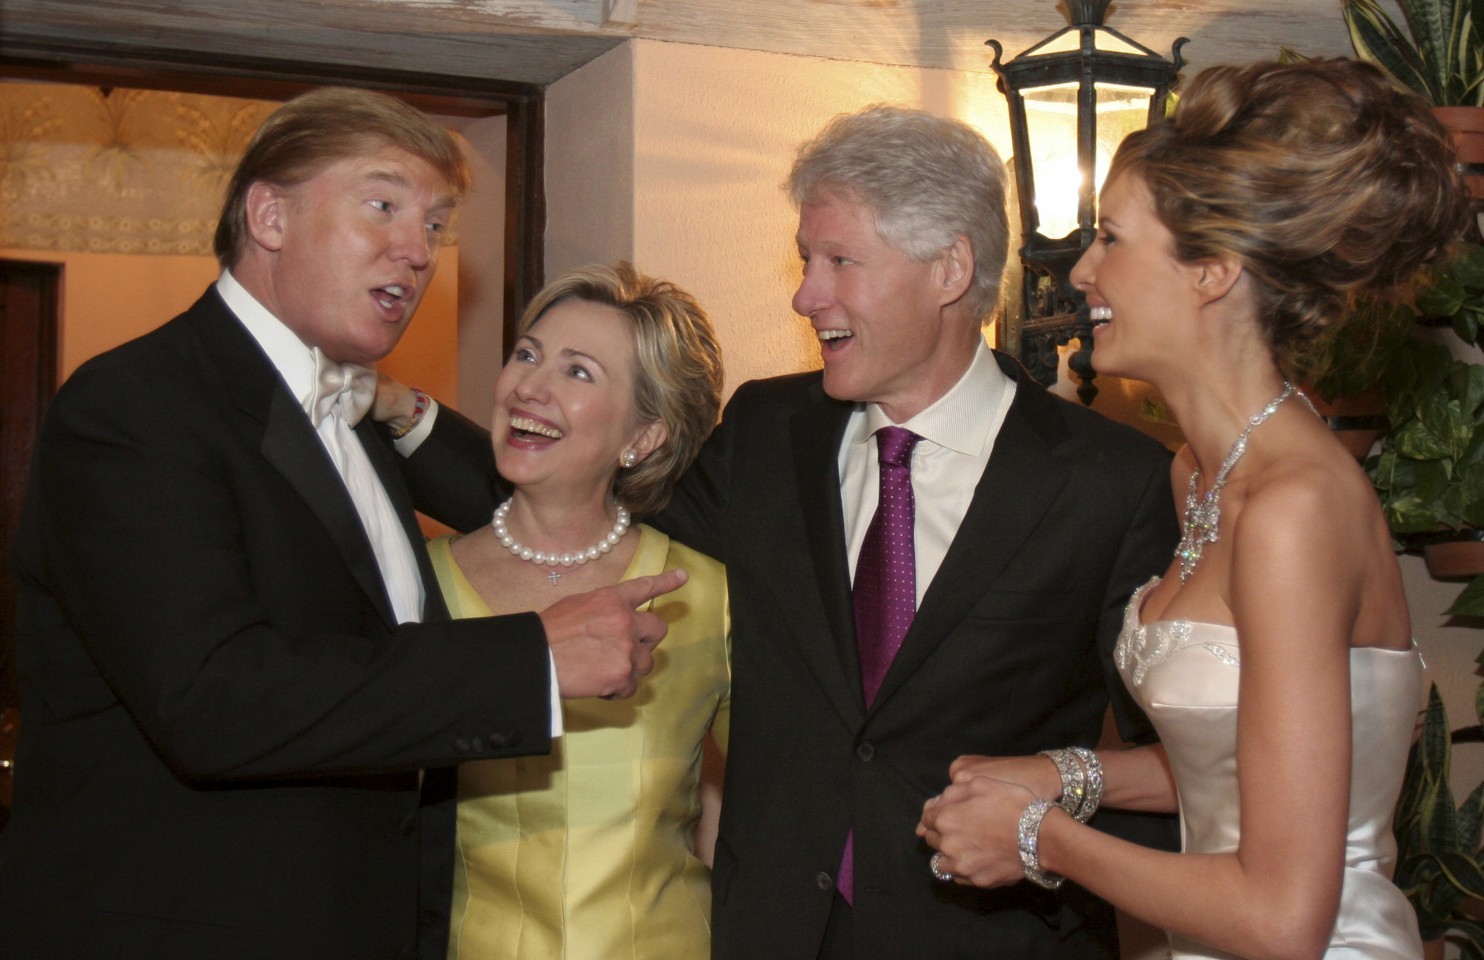 The Trumps and Clintons just chilling, planning our demise at the 14th Annual Trump Wedding.